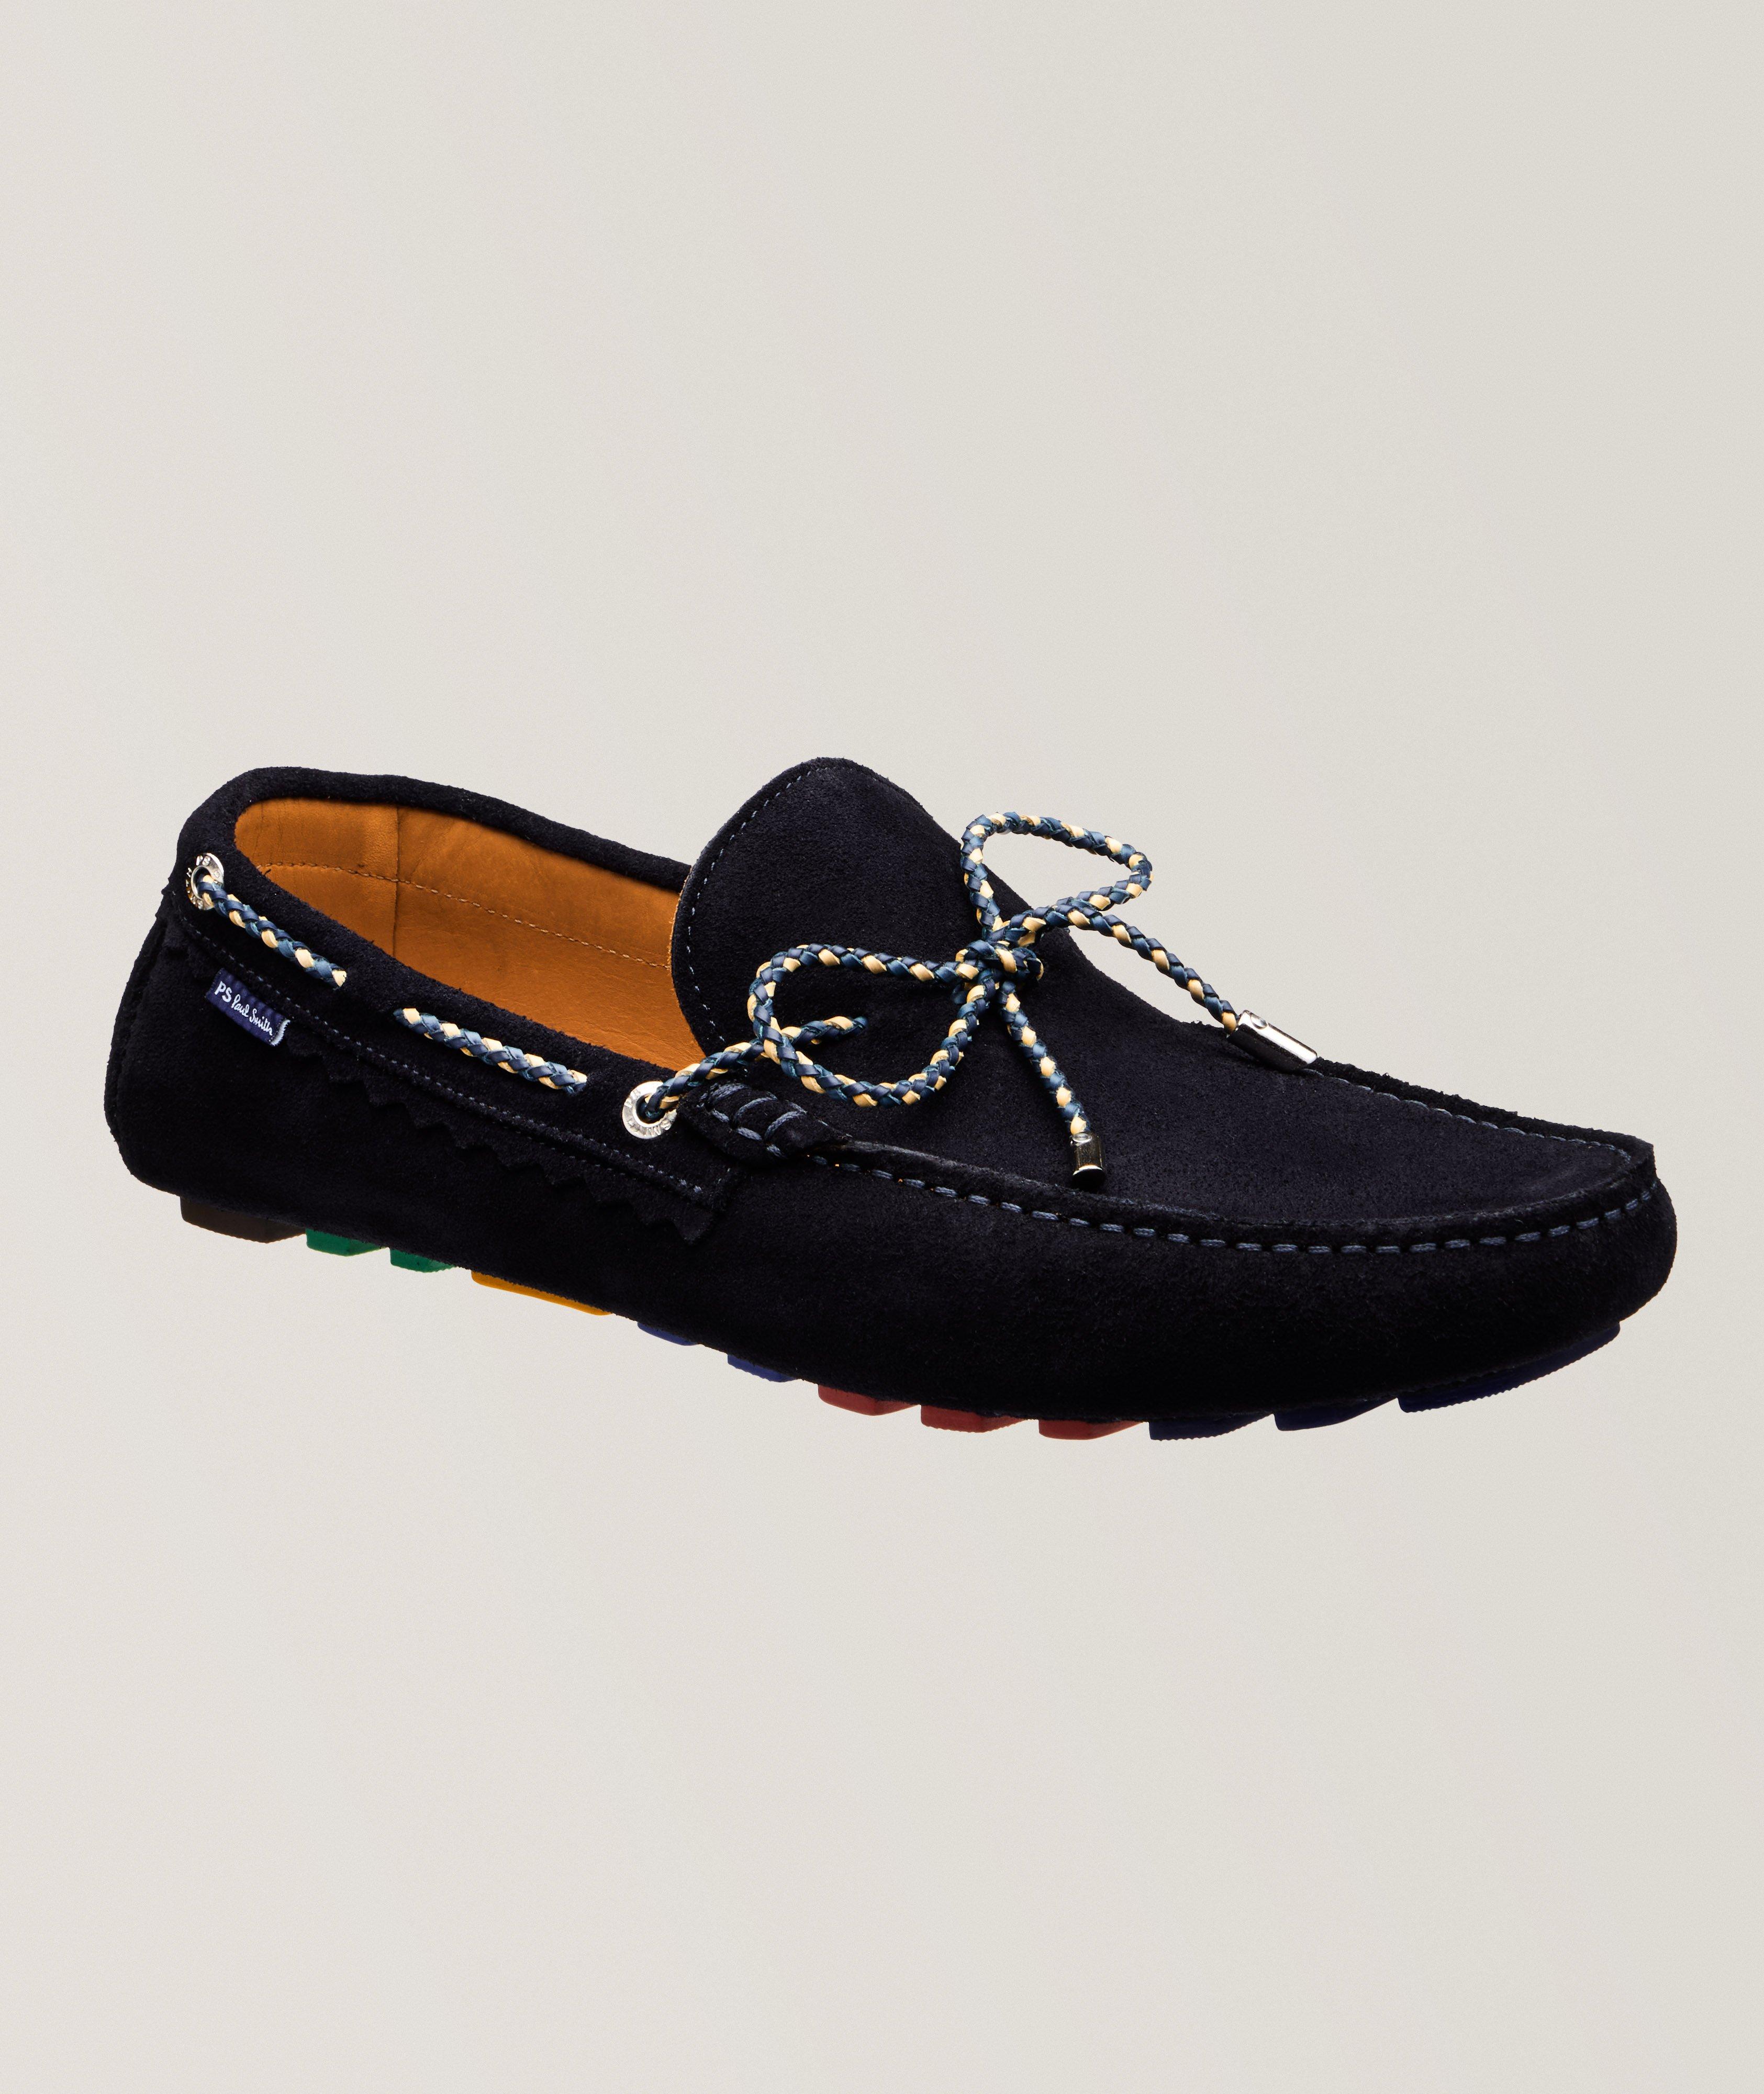 Springfield Suede Leather Driving Loafers image 0